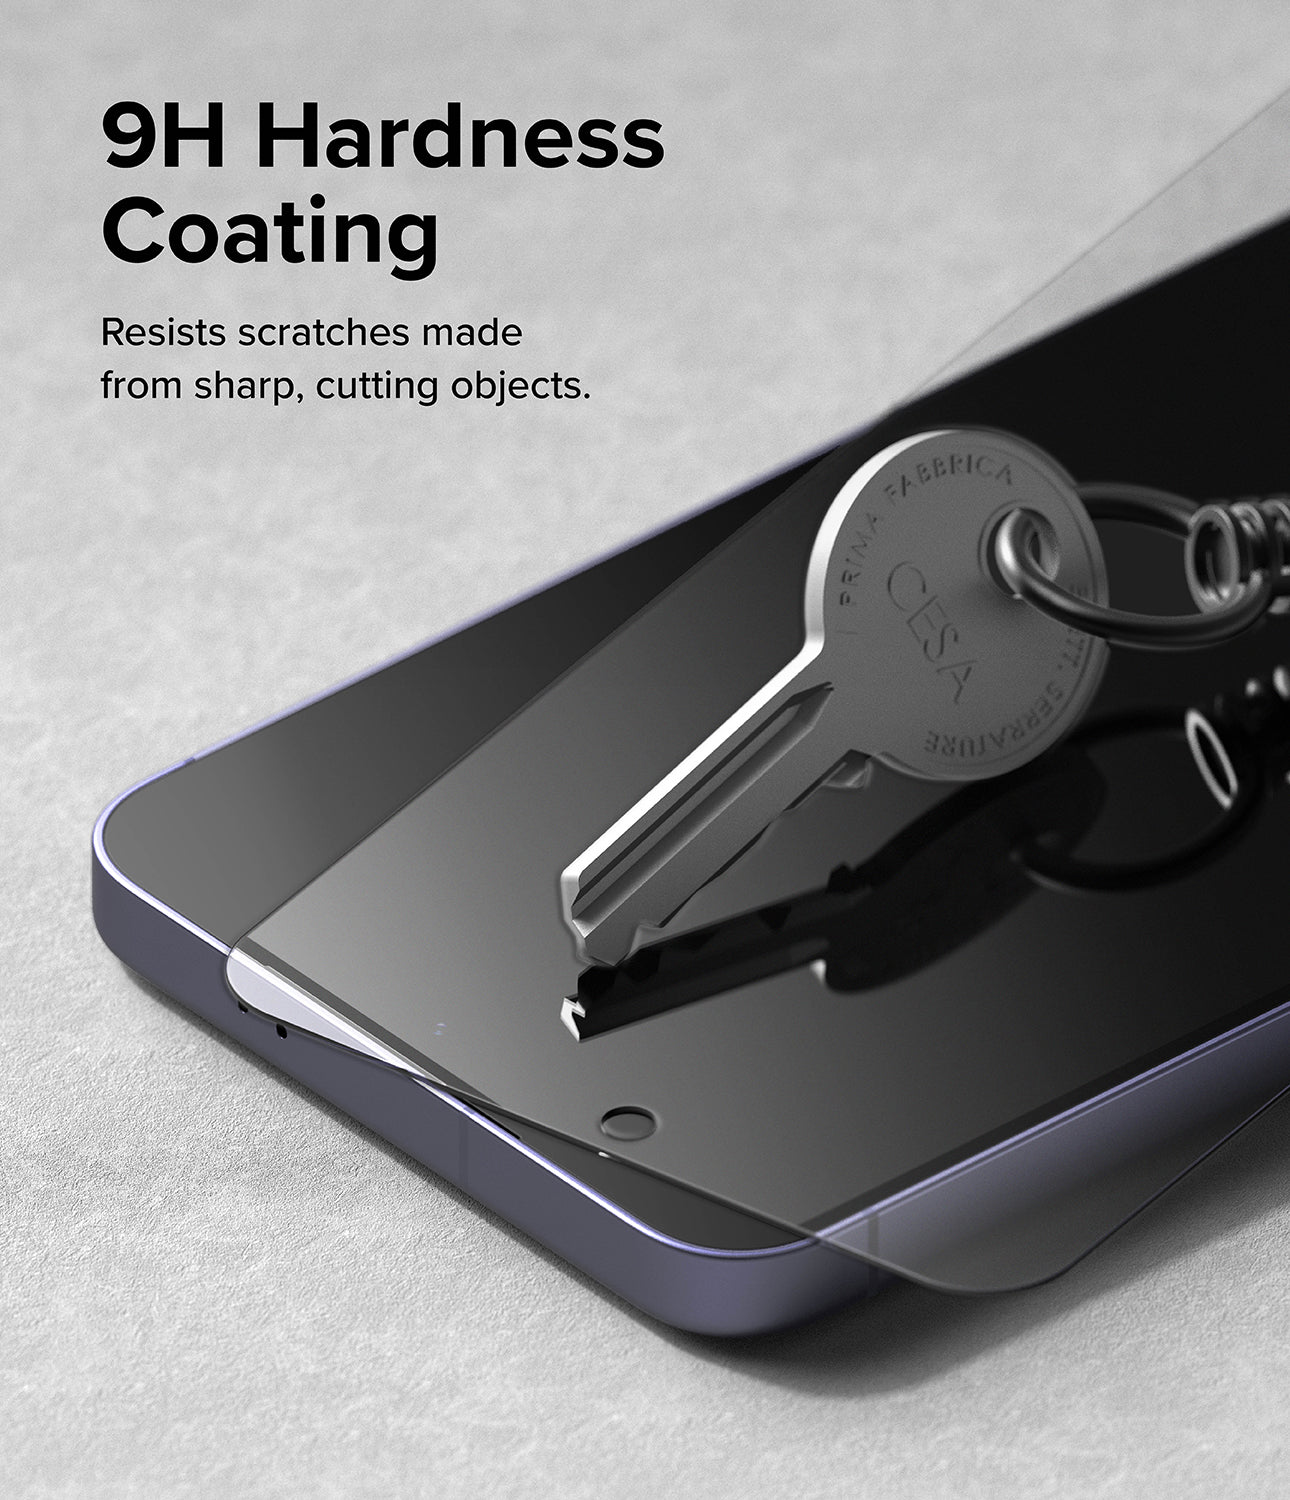 Galaxy S24 Screen Protector | Easy Slide Tempered Glass - 9H Hardness Coating. Resists scratches made from sharp, cutting objects.